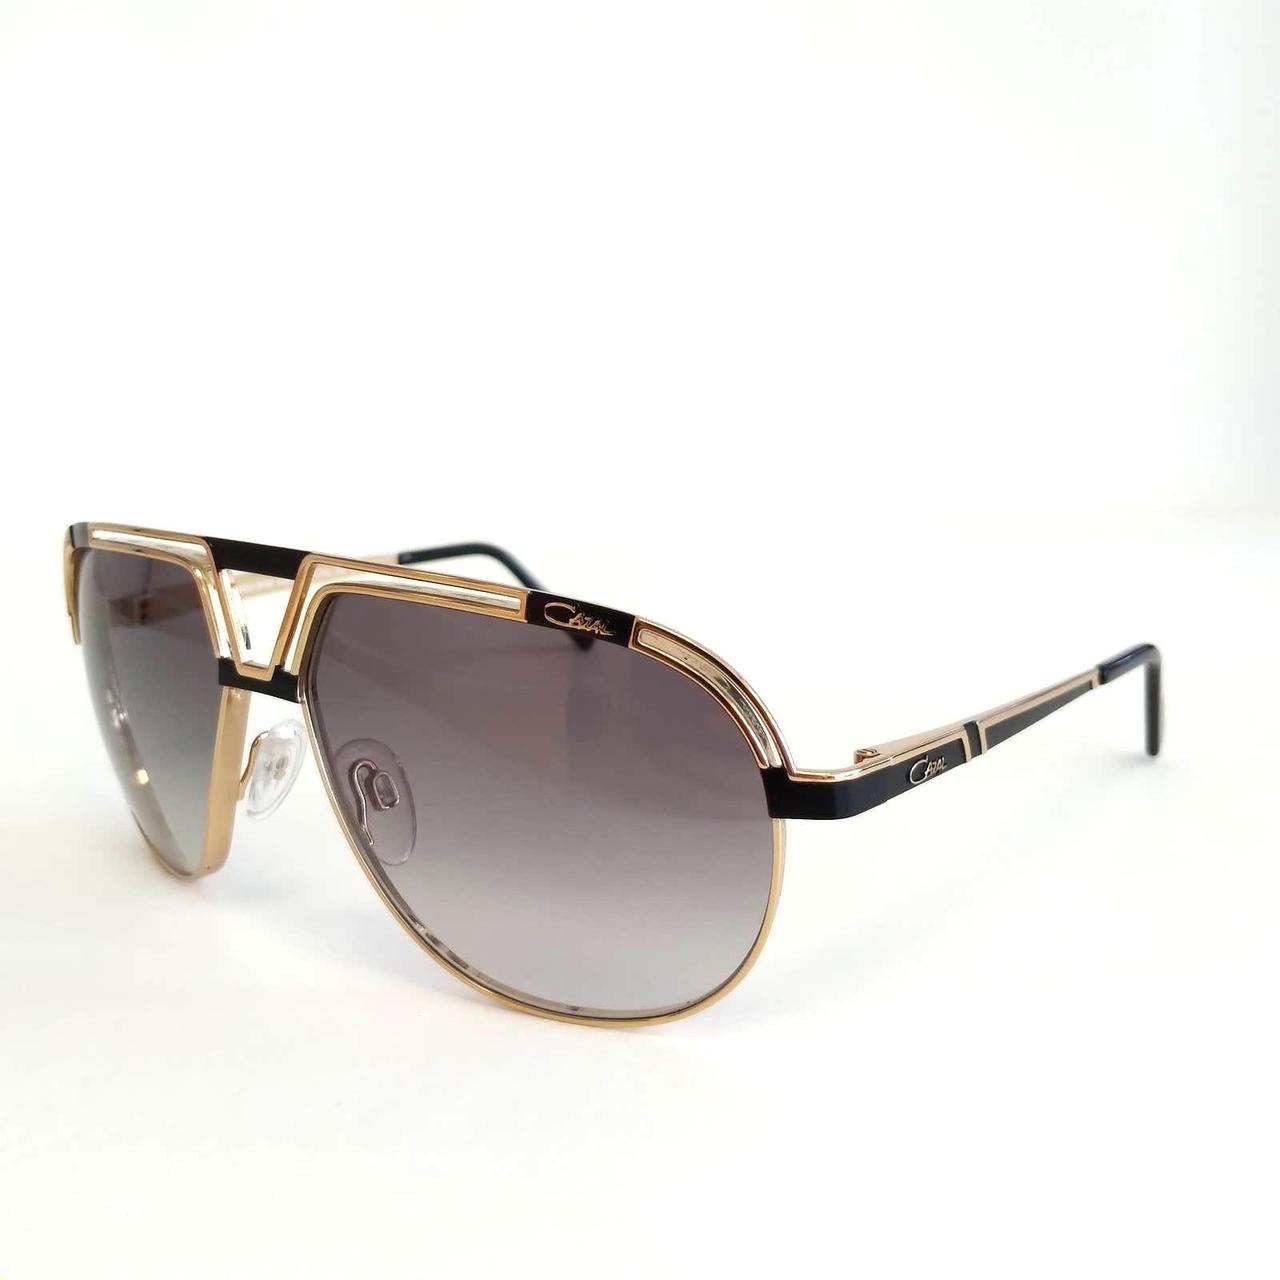 Product Image 1 - Brand: Cazal
Model: 9100
Style: Pilot
Frame/Temple Color: